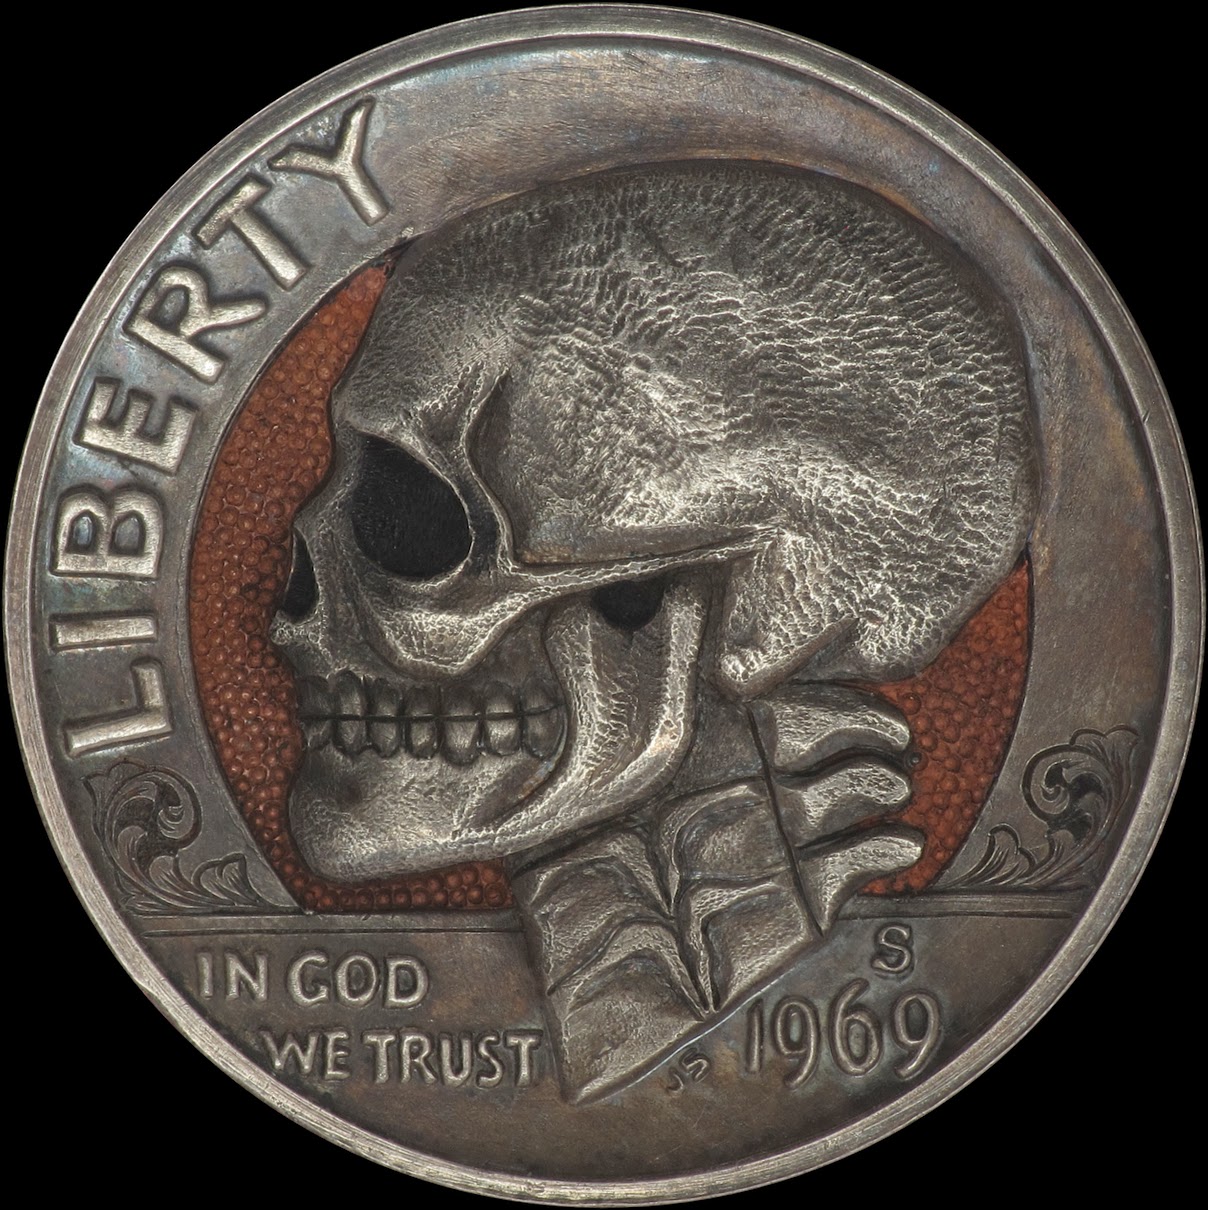 02-Dimeskull-Paolo-Curio-aka-MrThe-Hobo-Nickels-Skull-Coins-&-Other-Sculptures-www-designstack-co